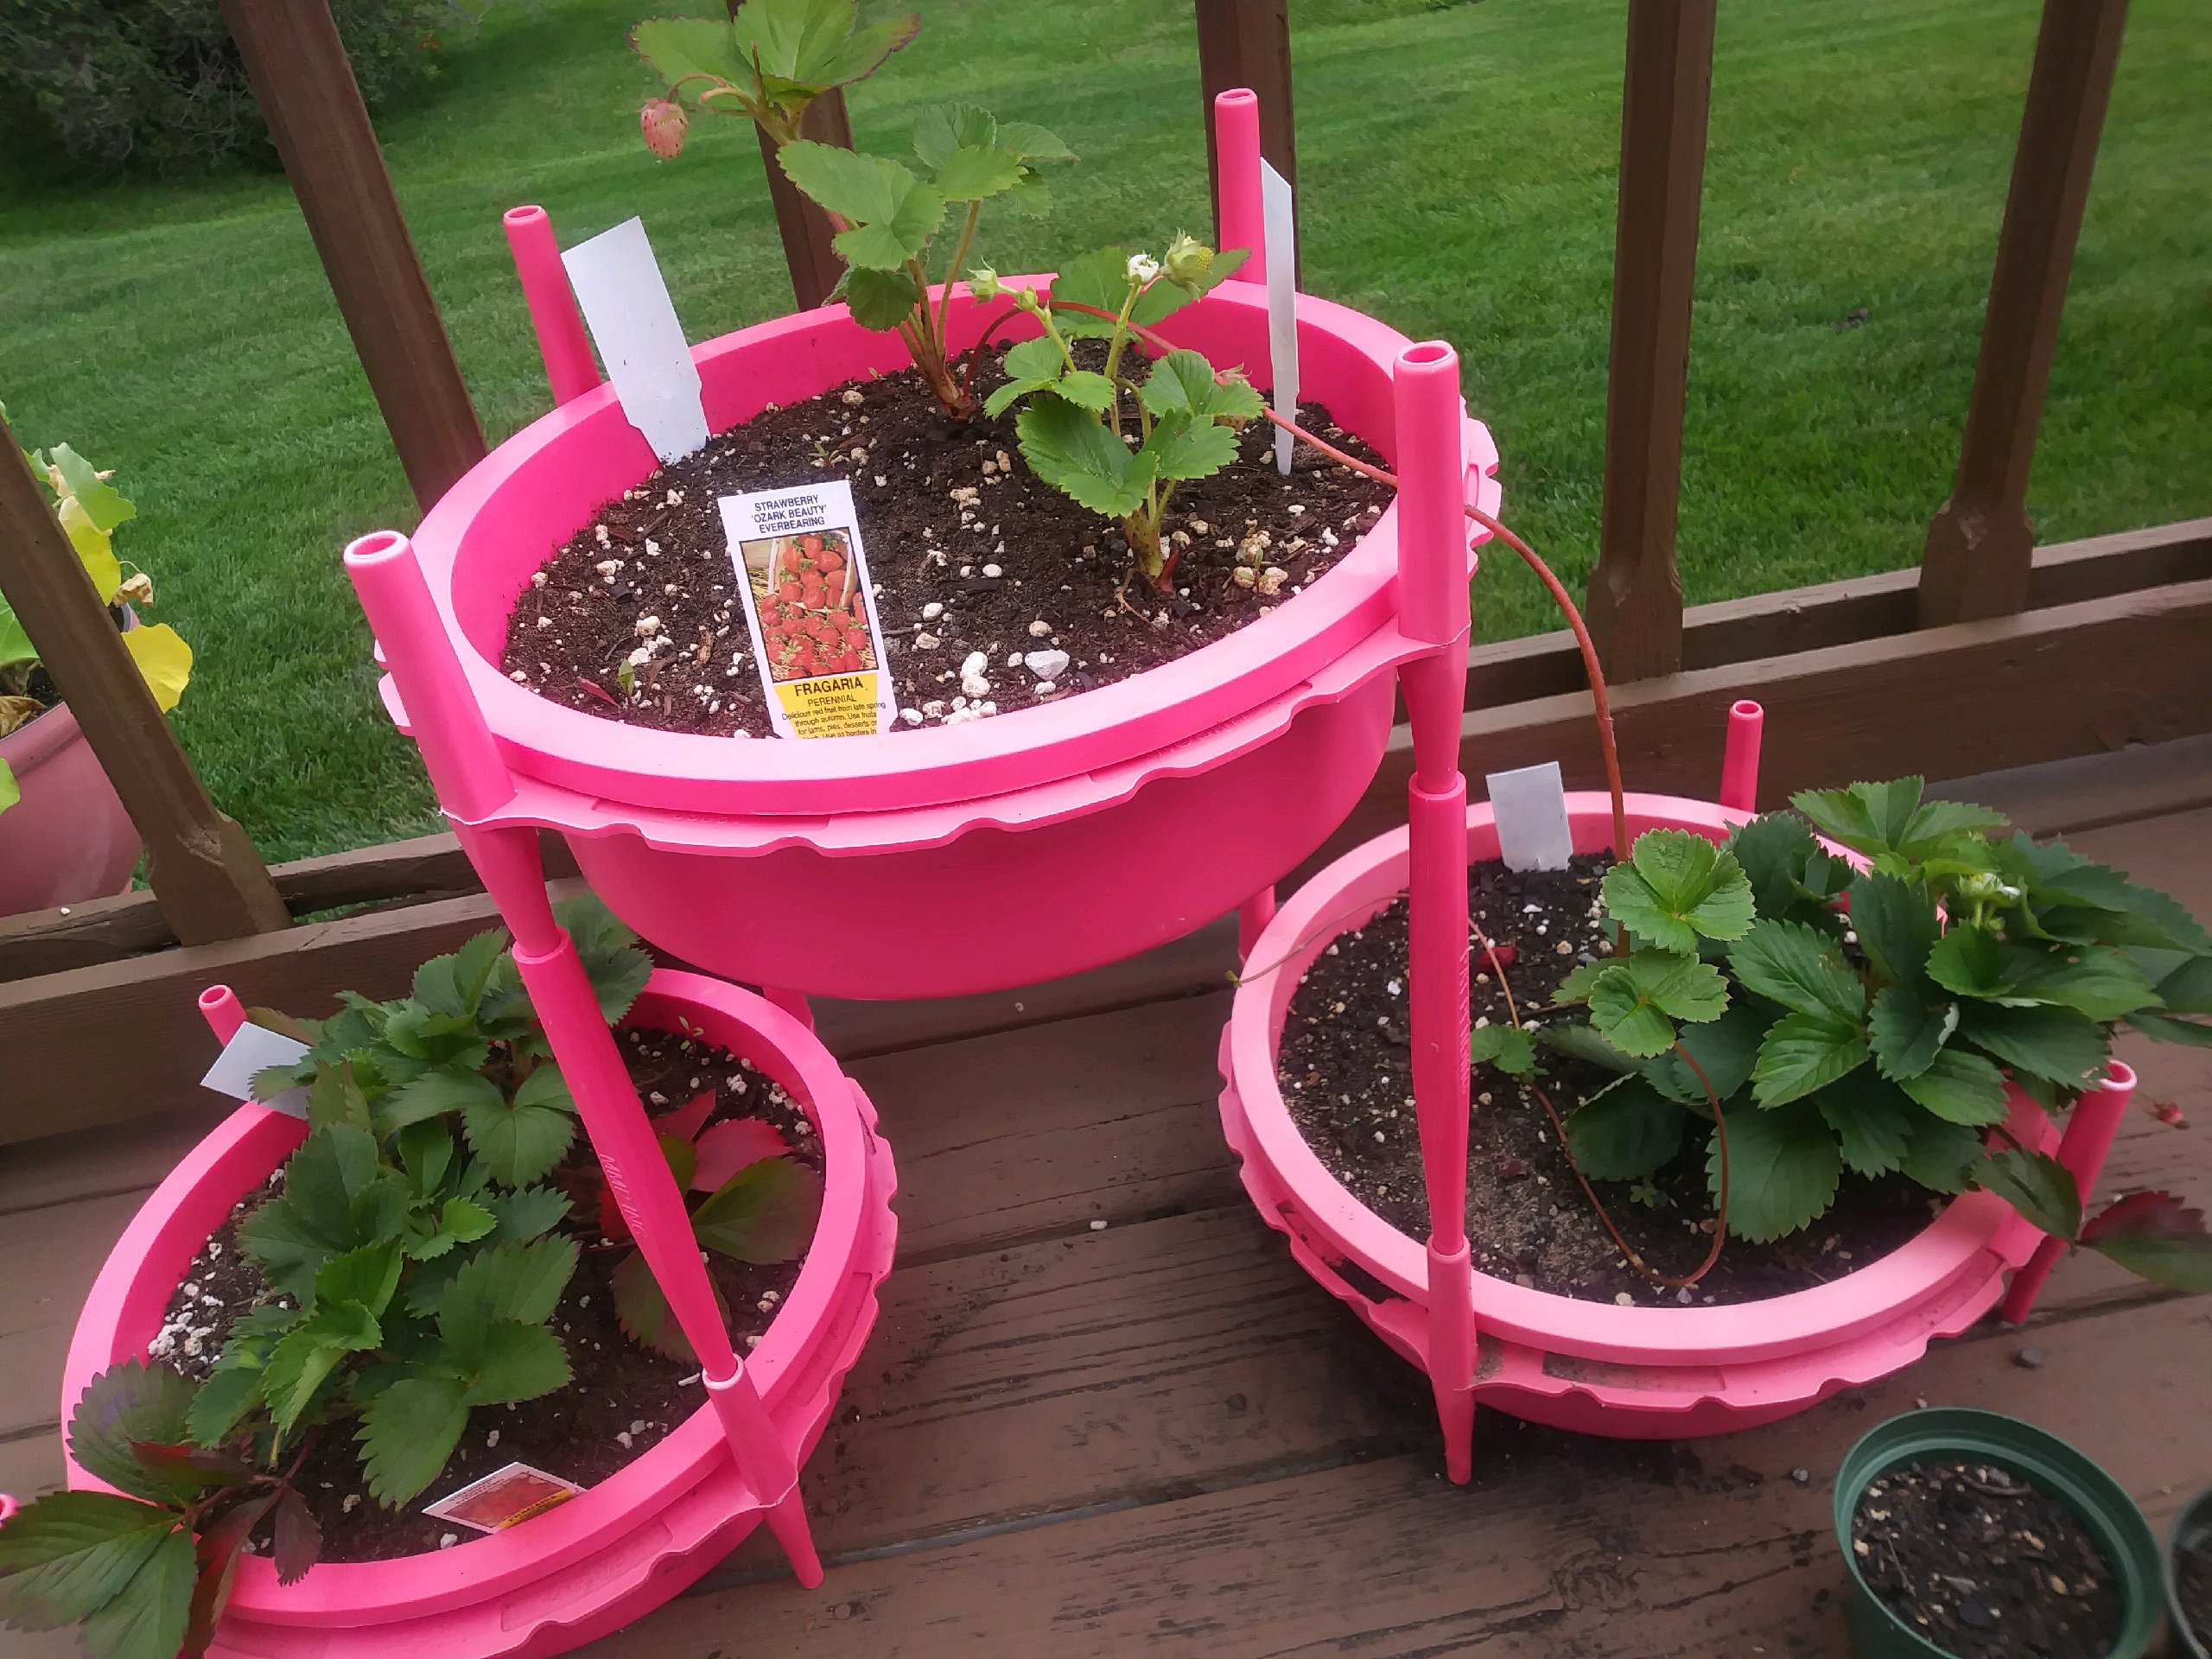 Gro-Hoops work together to create unique plantings